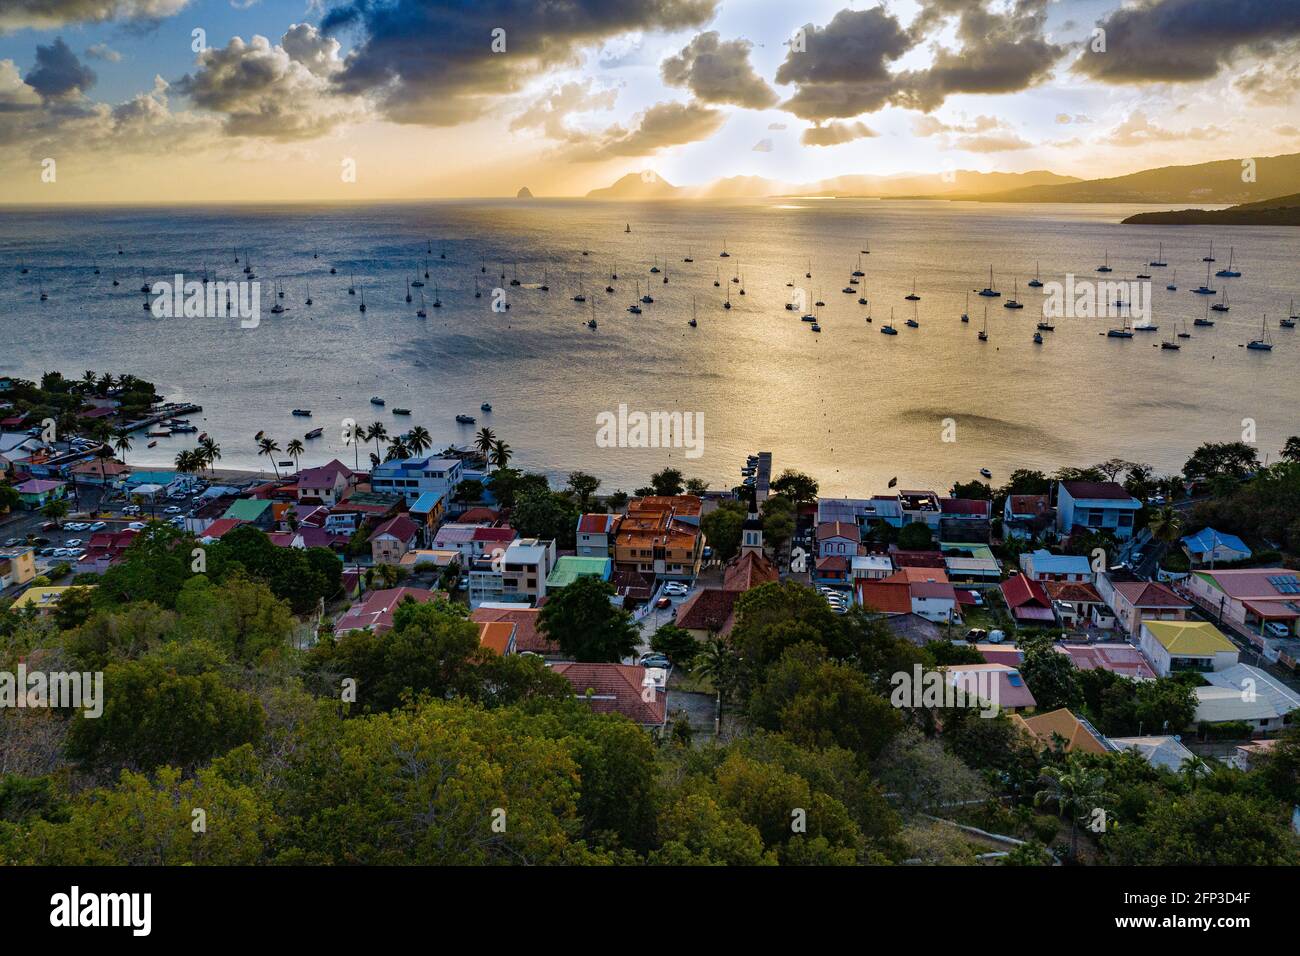 Sainte-Anne is the southernmost town of Martinique. It overlooks the magnificent bay which accommodates a large number of boats Stock Photo